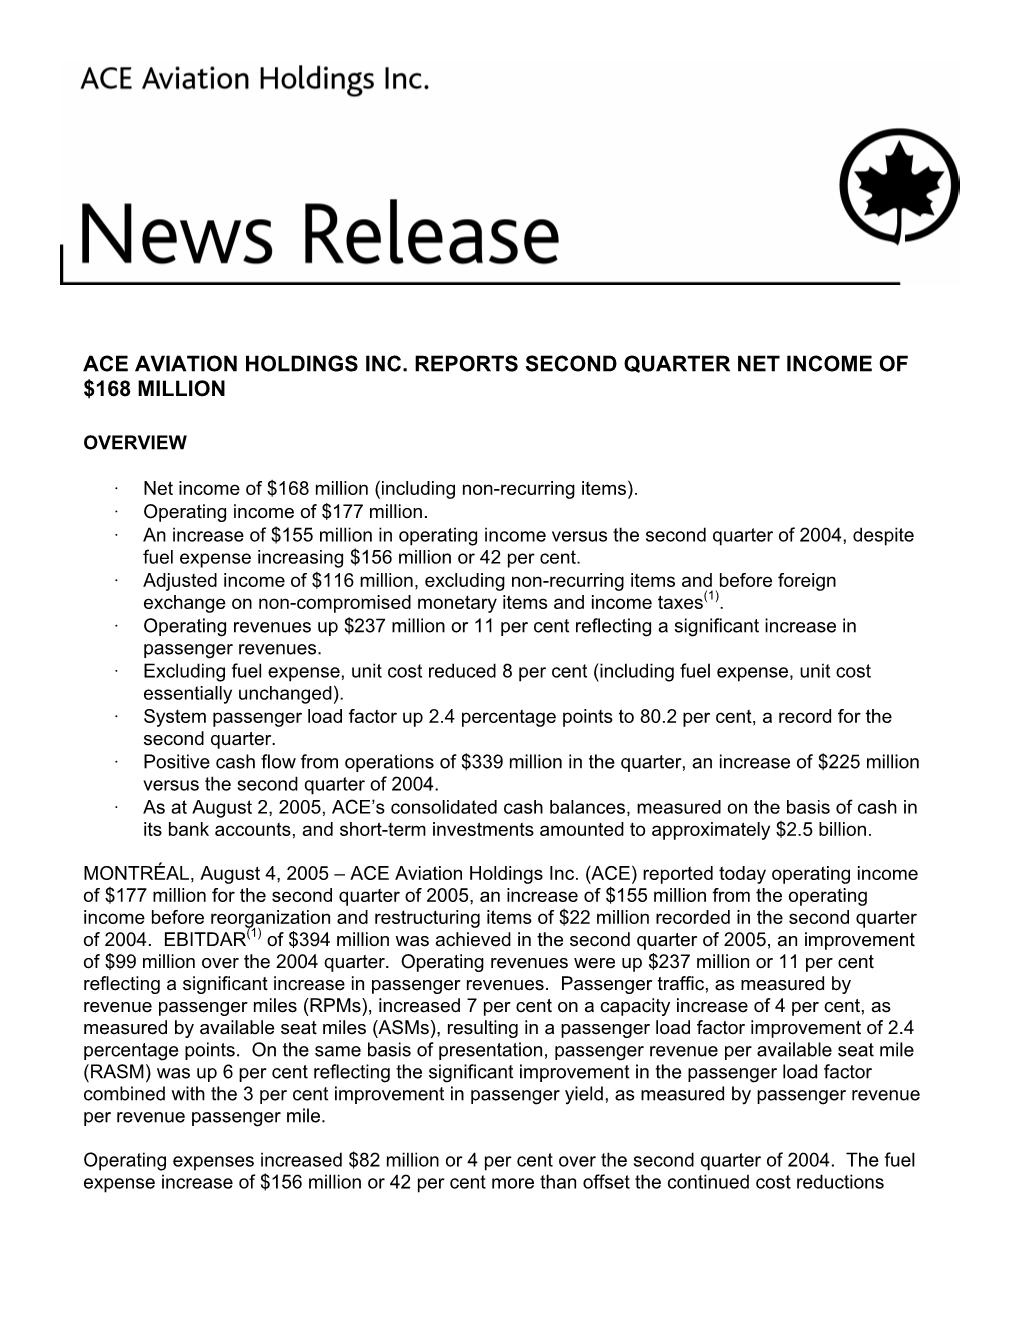 Ace Aviation Holdings Inc. Reports Second Quarter Net Income of $168 Million